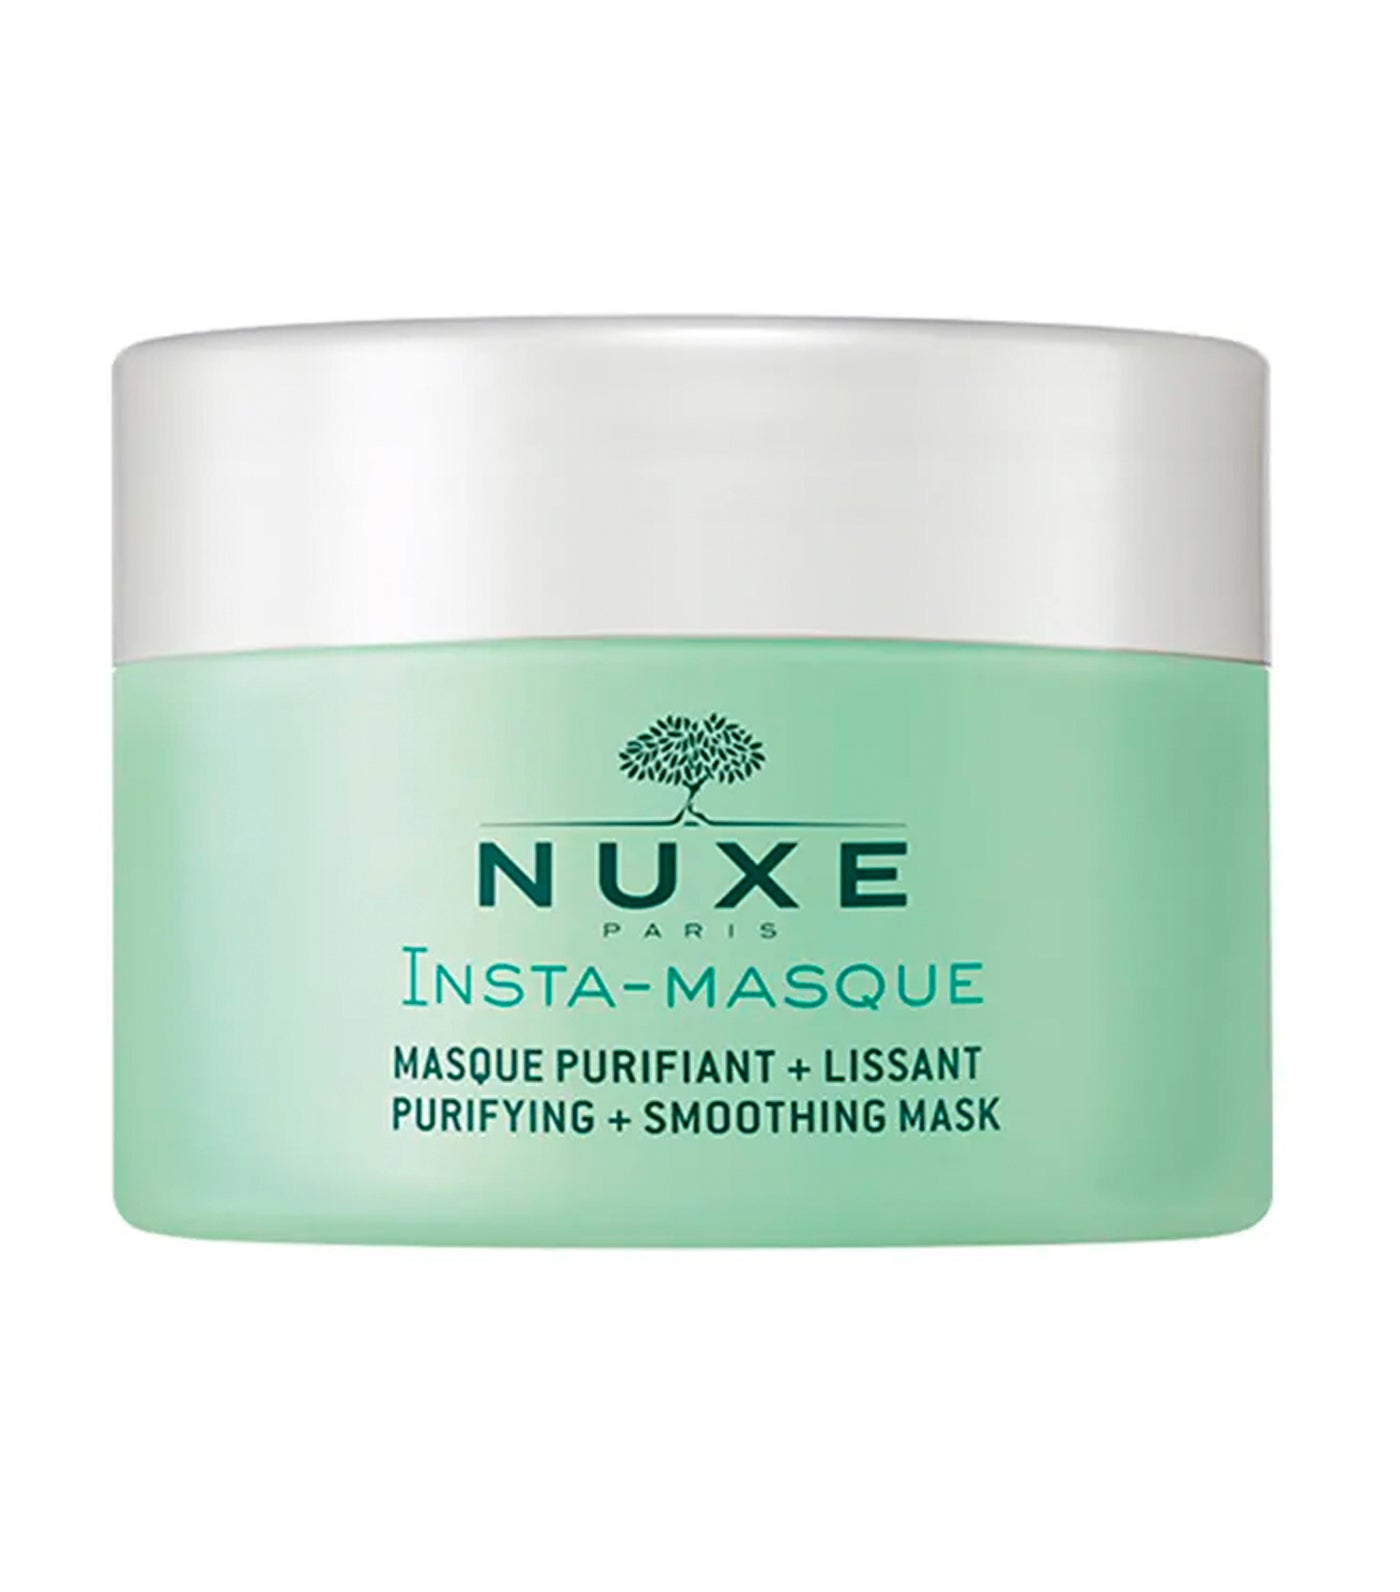 nuxe insta-masque purifying + smoothing mask